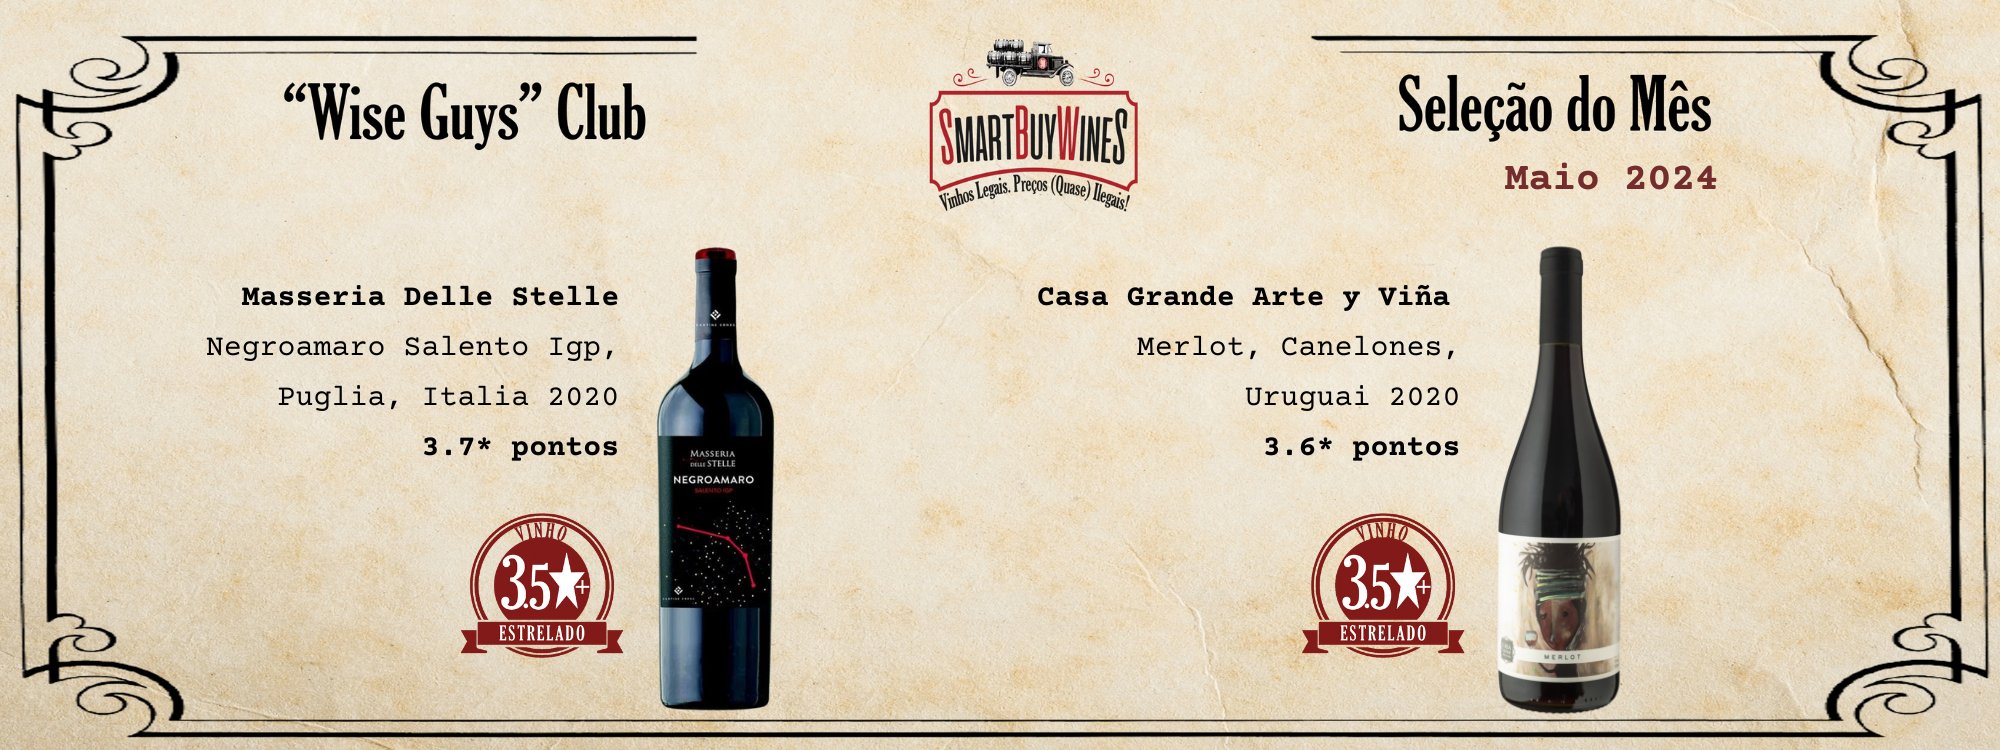 CLUBE WISE GUYS - SmartBuyWines.com.br